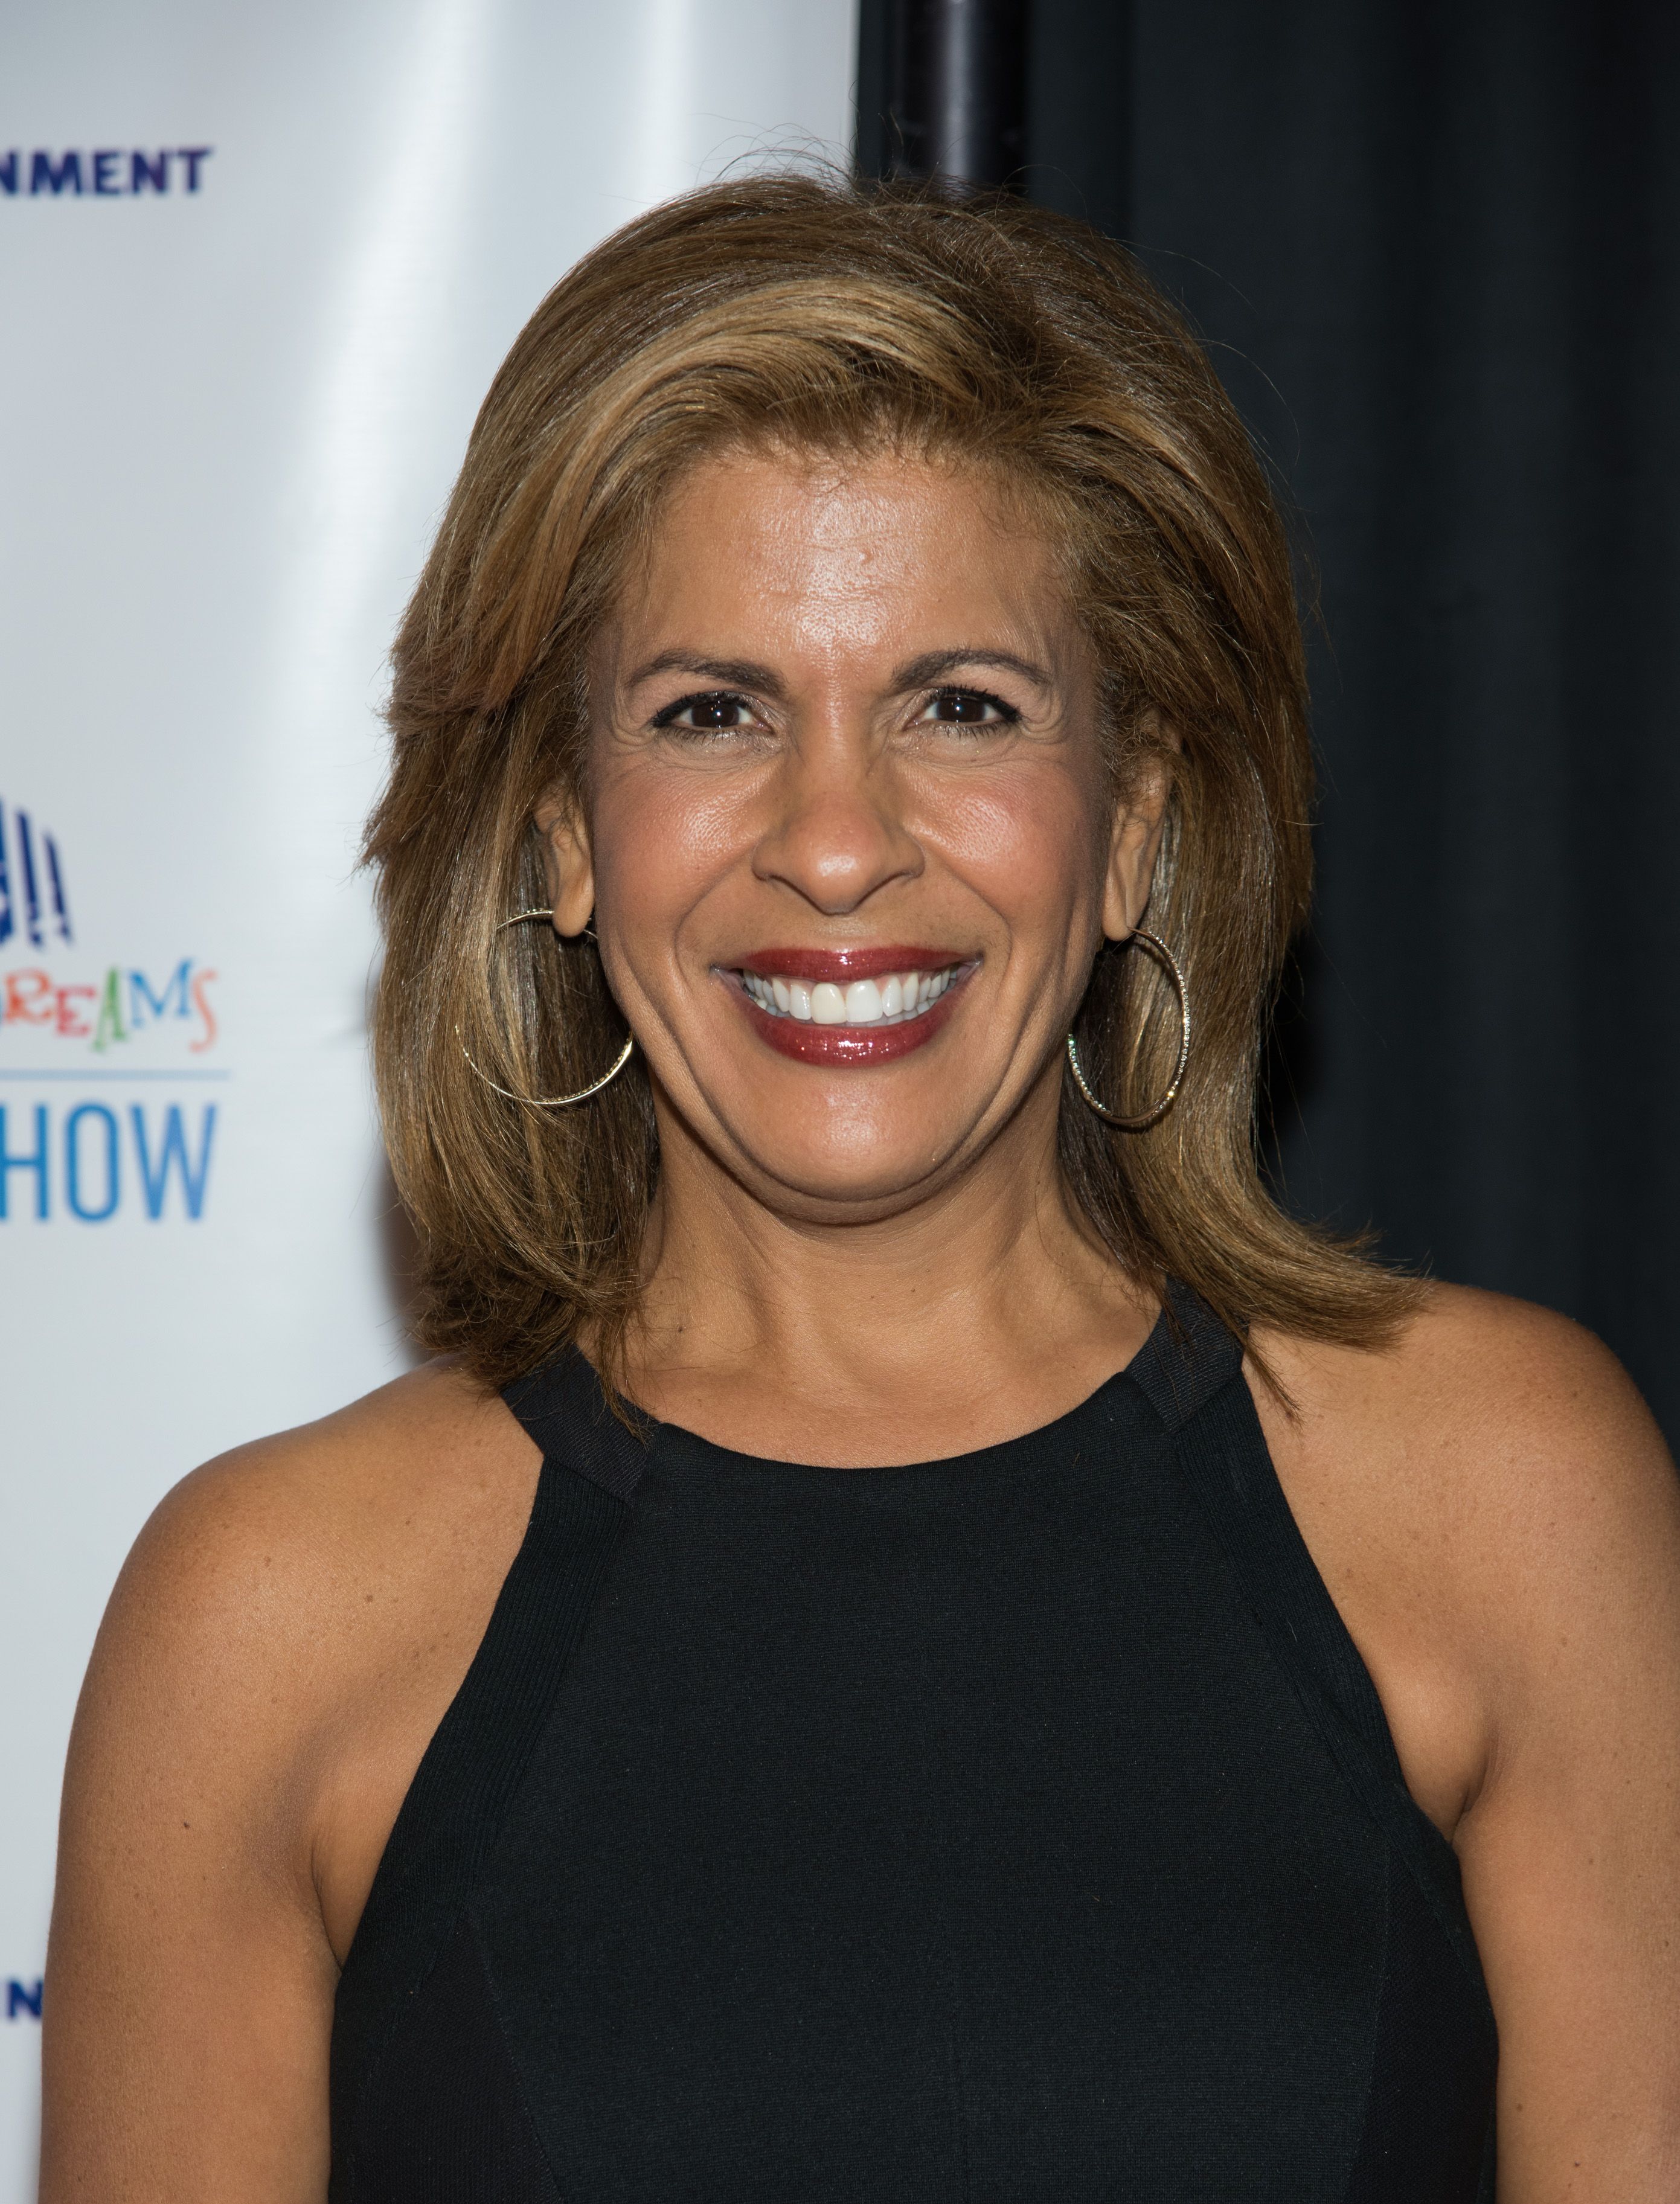 Hoda Kotb at the Garden of Dreams Foundation Children's Talent Show at Radio City Music Hall on June 18, 2015, in New York City | Source: Getty Images